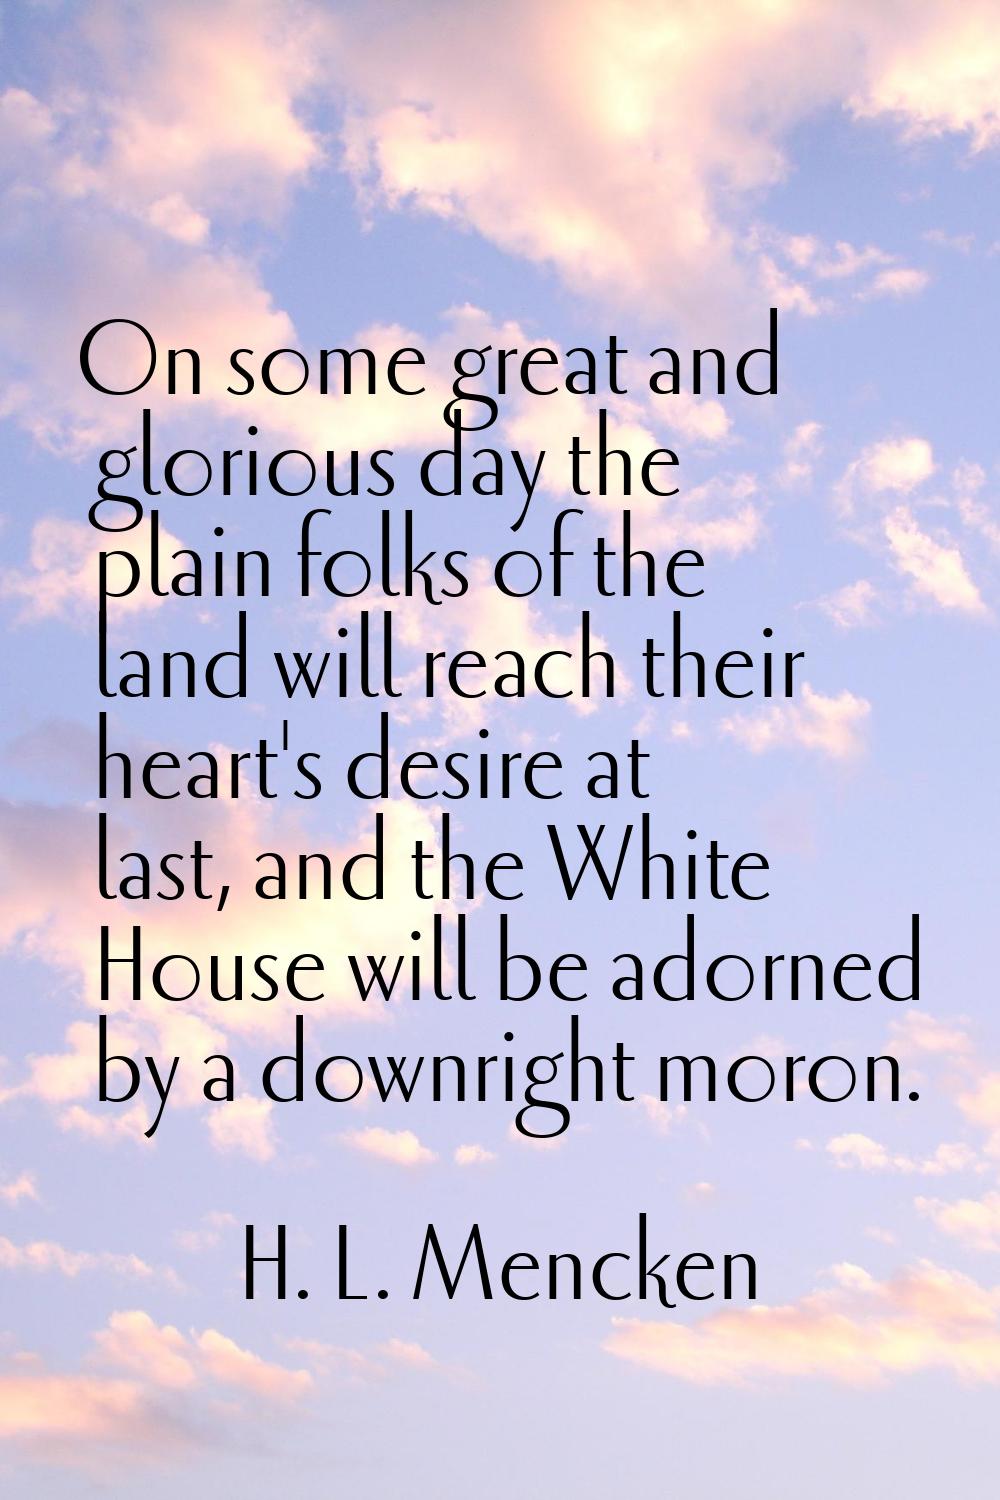 On some great and glorious day the plain folks of the land will reach their heart's desire at last,